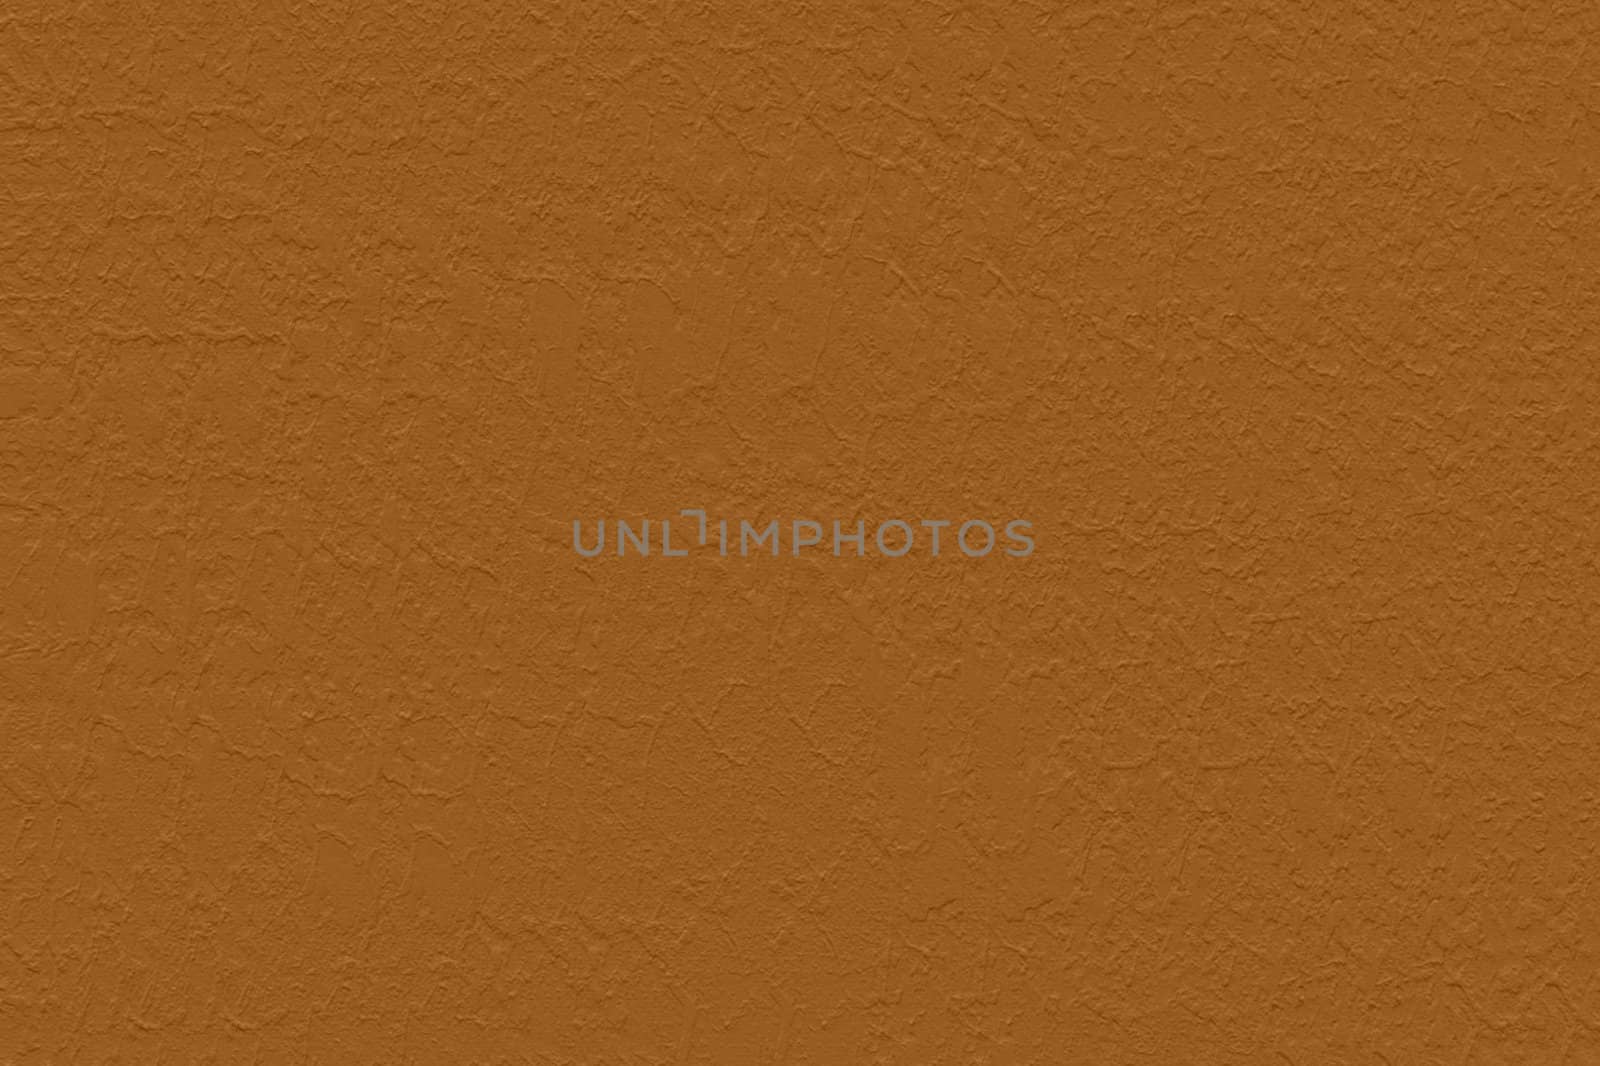 Abstract textured light brown background